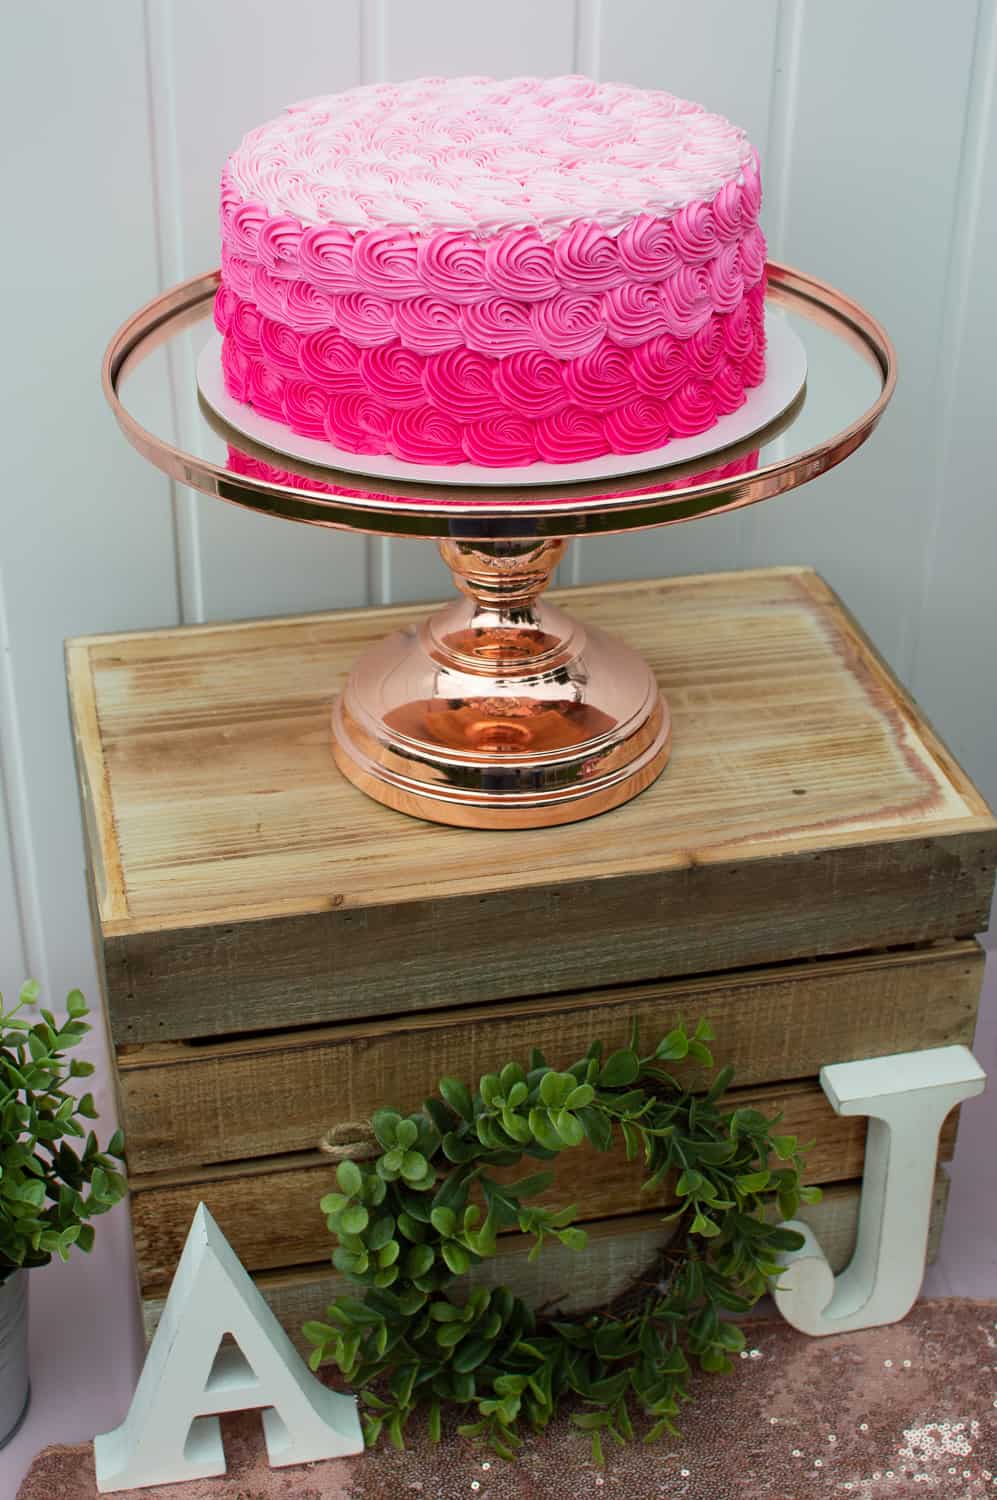 Amalfi Decor Rose Gold Cake Stand with pink rosette cake